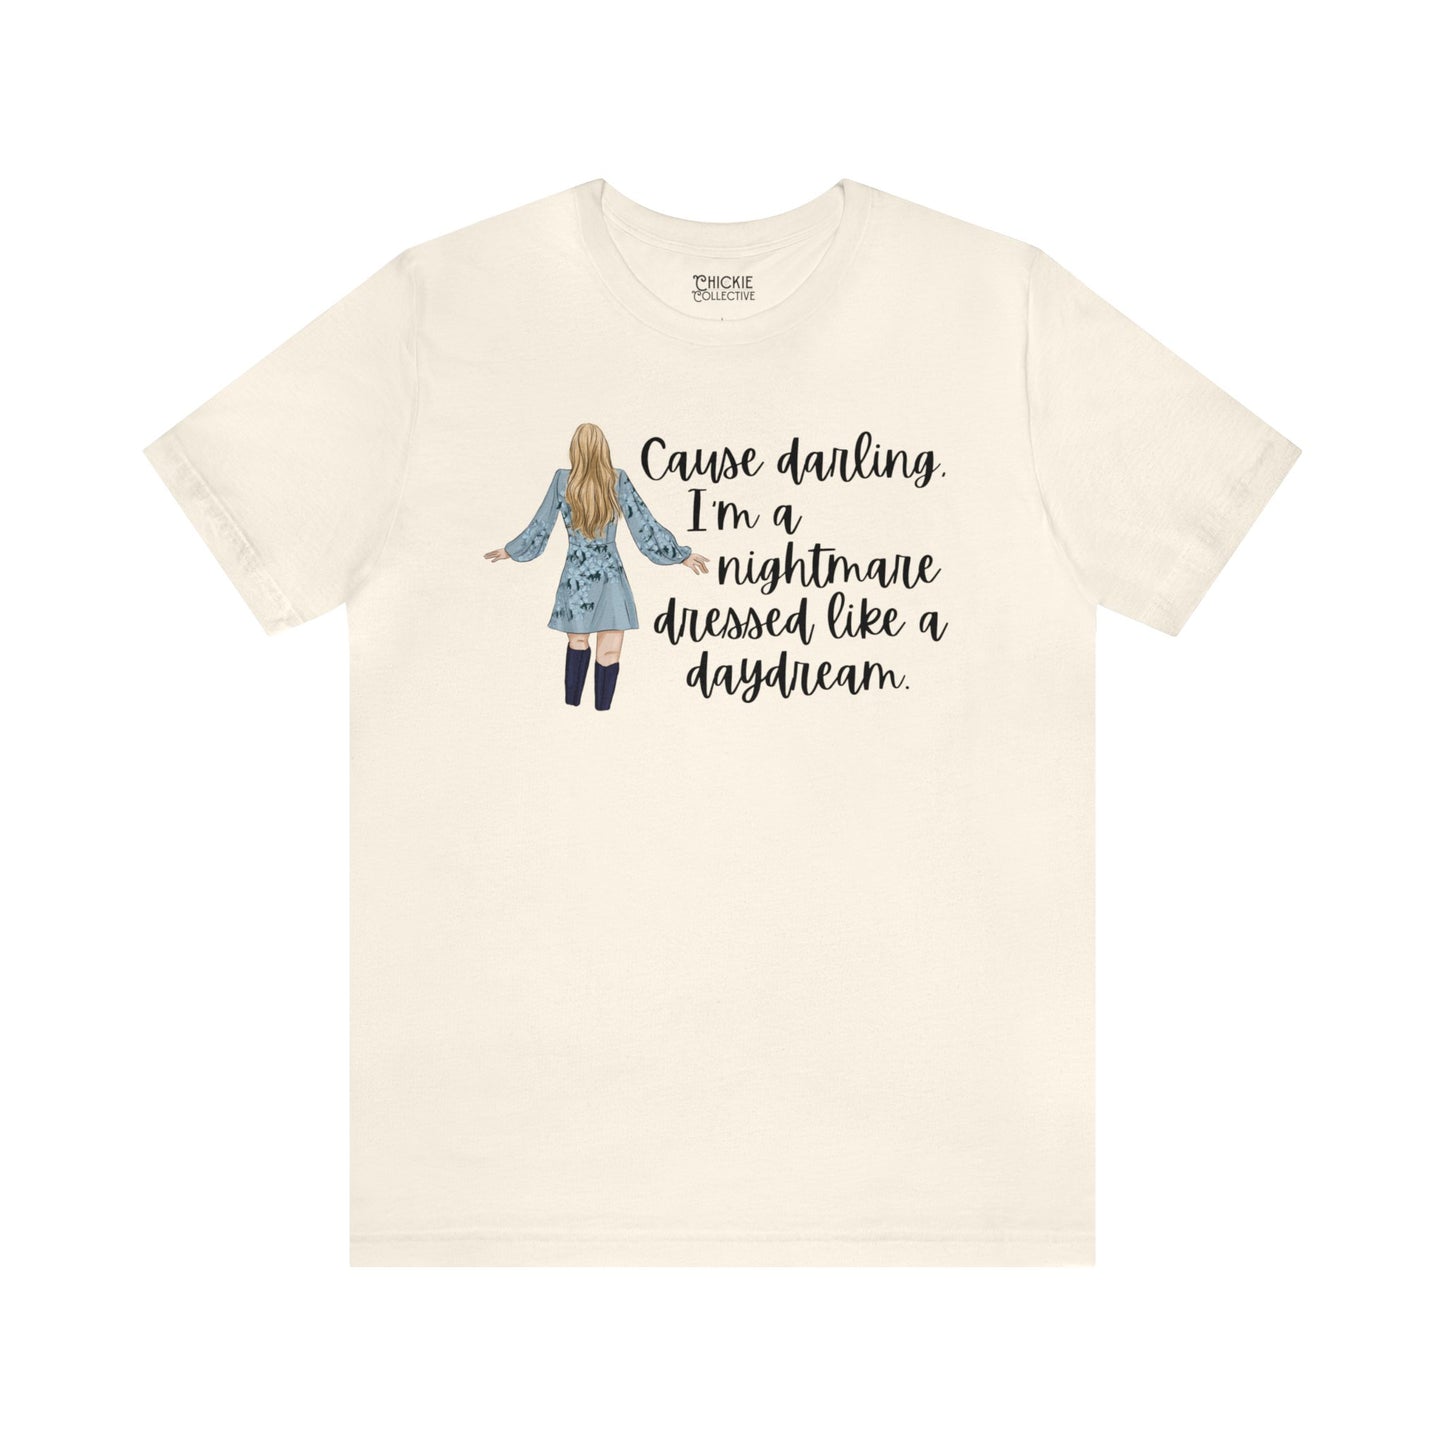 Taylor Swift Preppy Picture T-Shirt - Cause Darling I'm A Nightmare